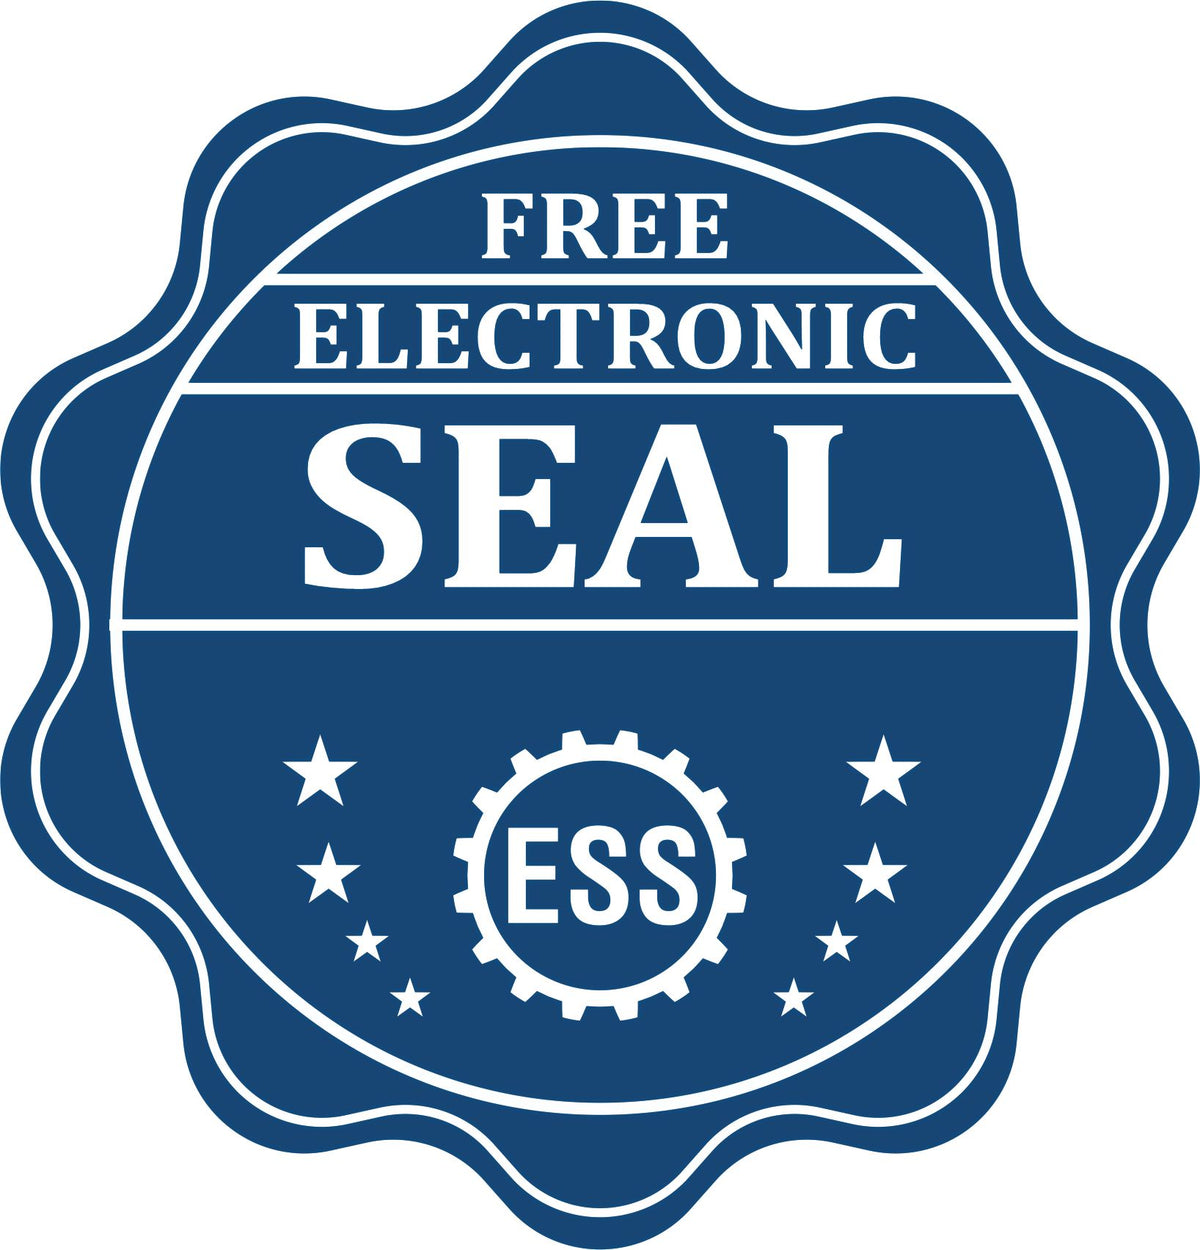 A badge showing a free electronic seal for the Hybrid Delaware Landscape Architect Seal with stars and the ESS gear on the emblem.